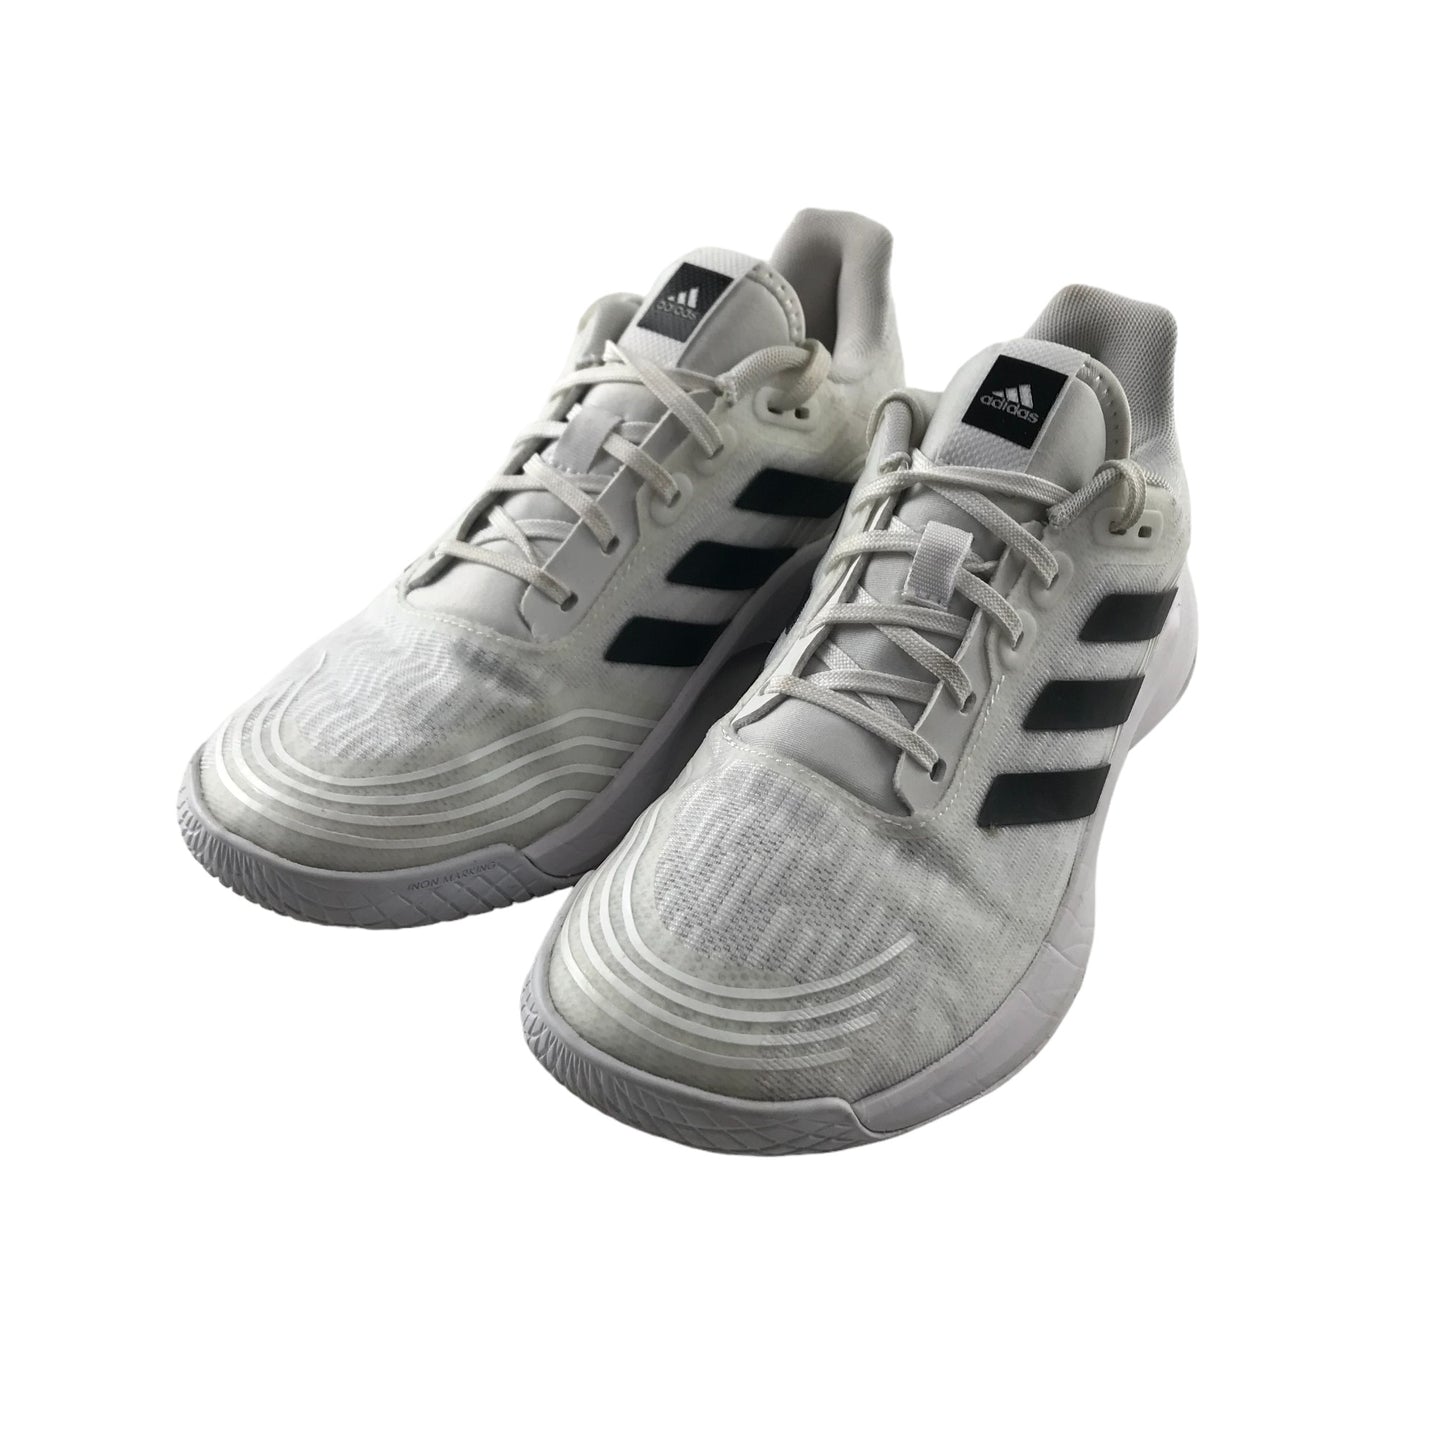 Adidas Bounce Trainers Shoe Size 5 White and Black with Laces